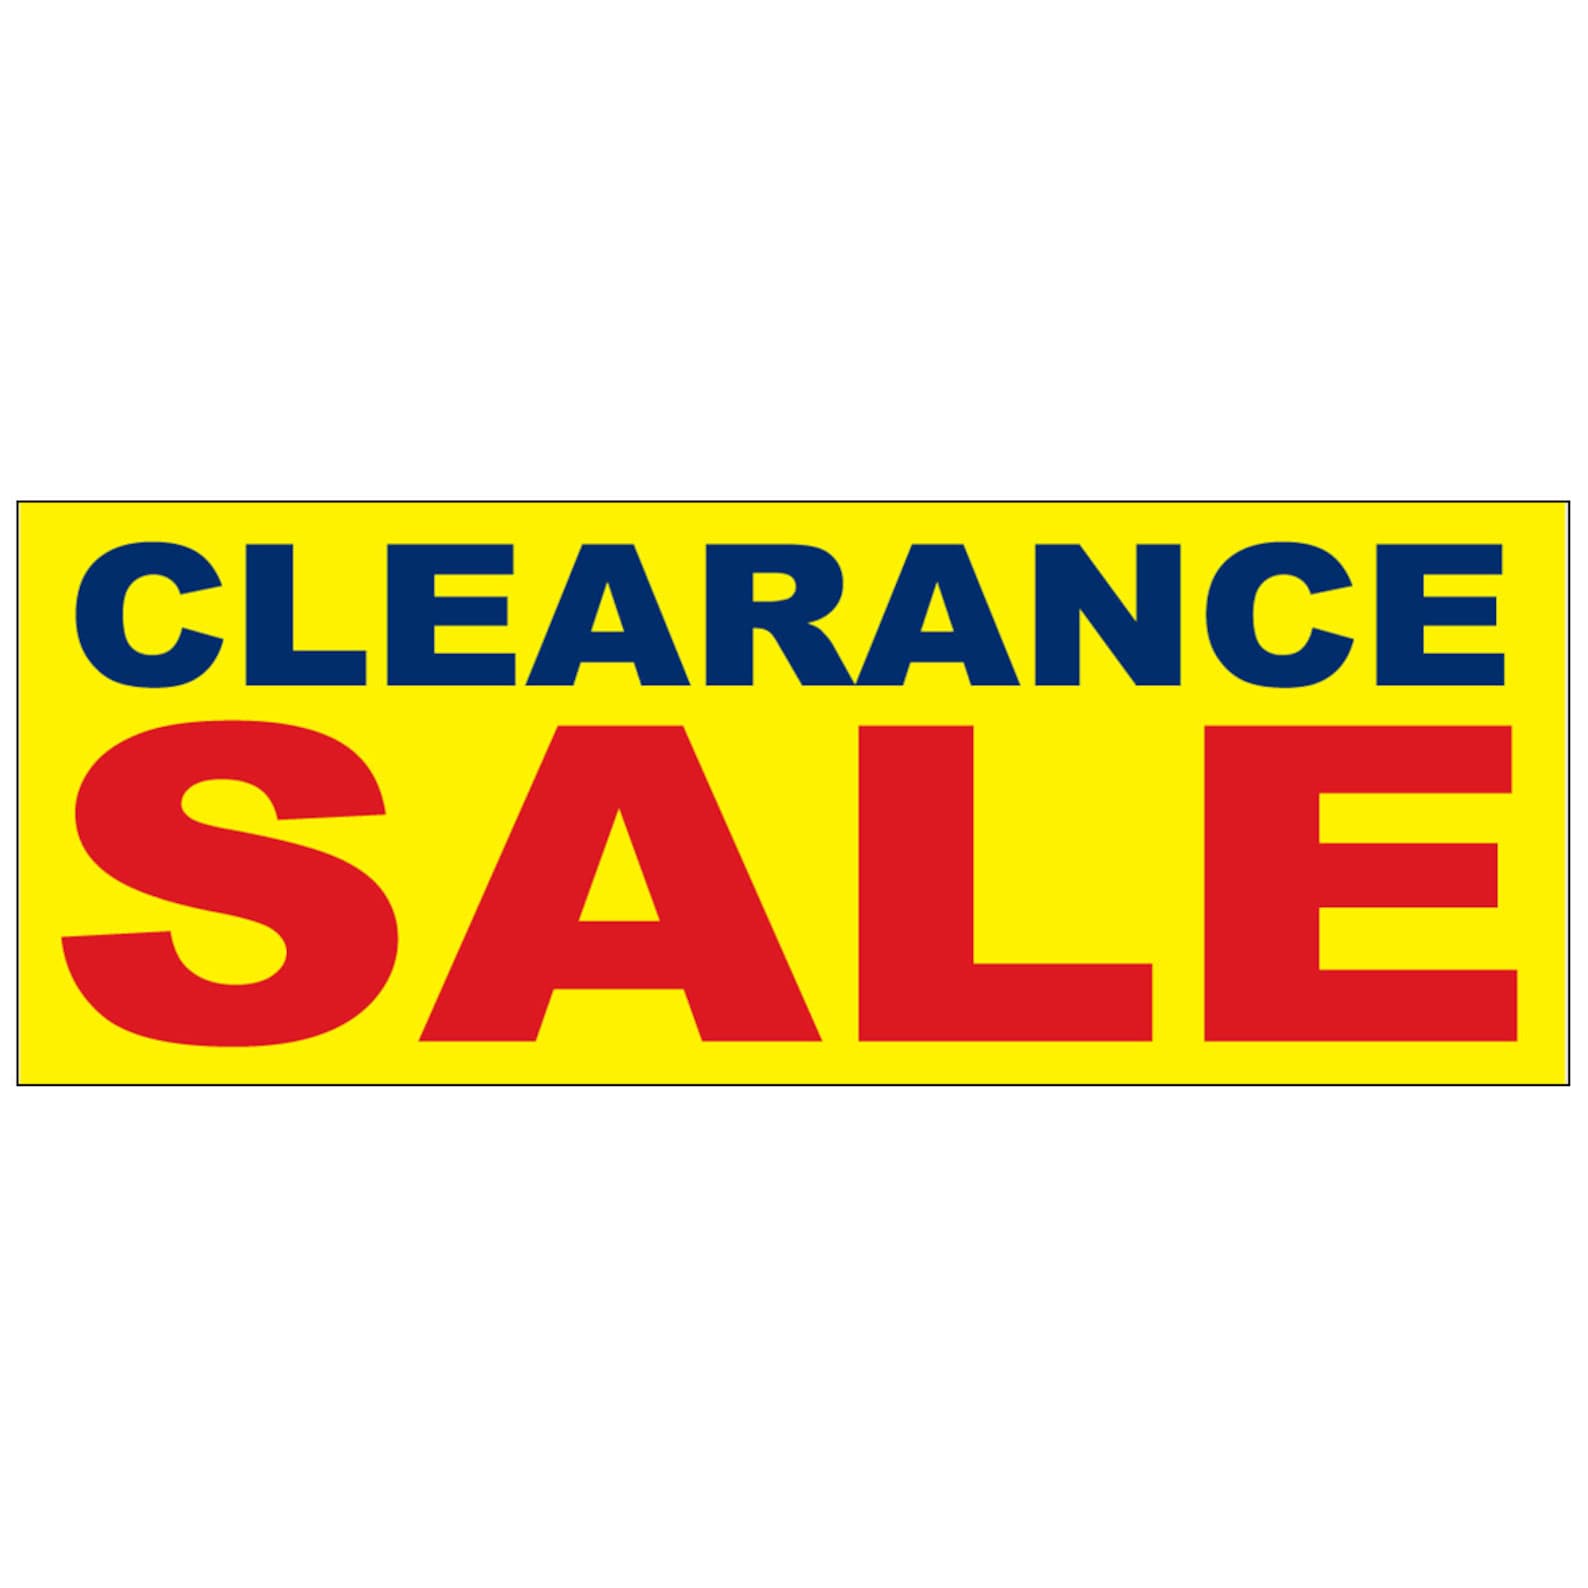 Printable Clearance Sign